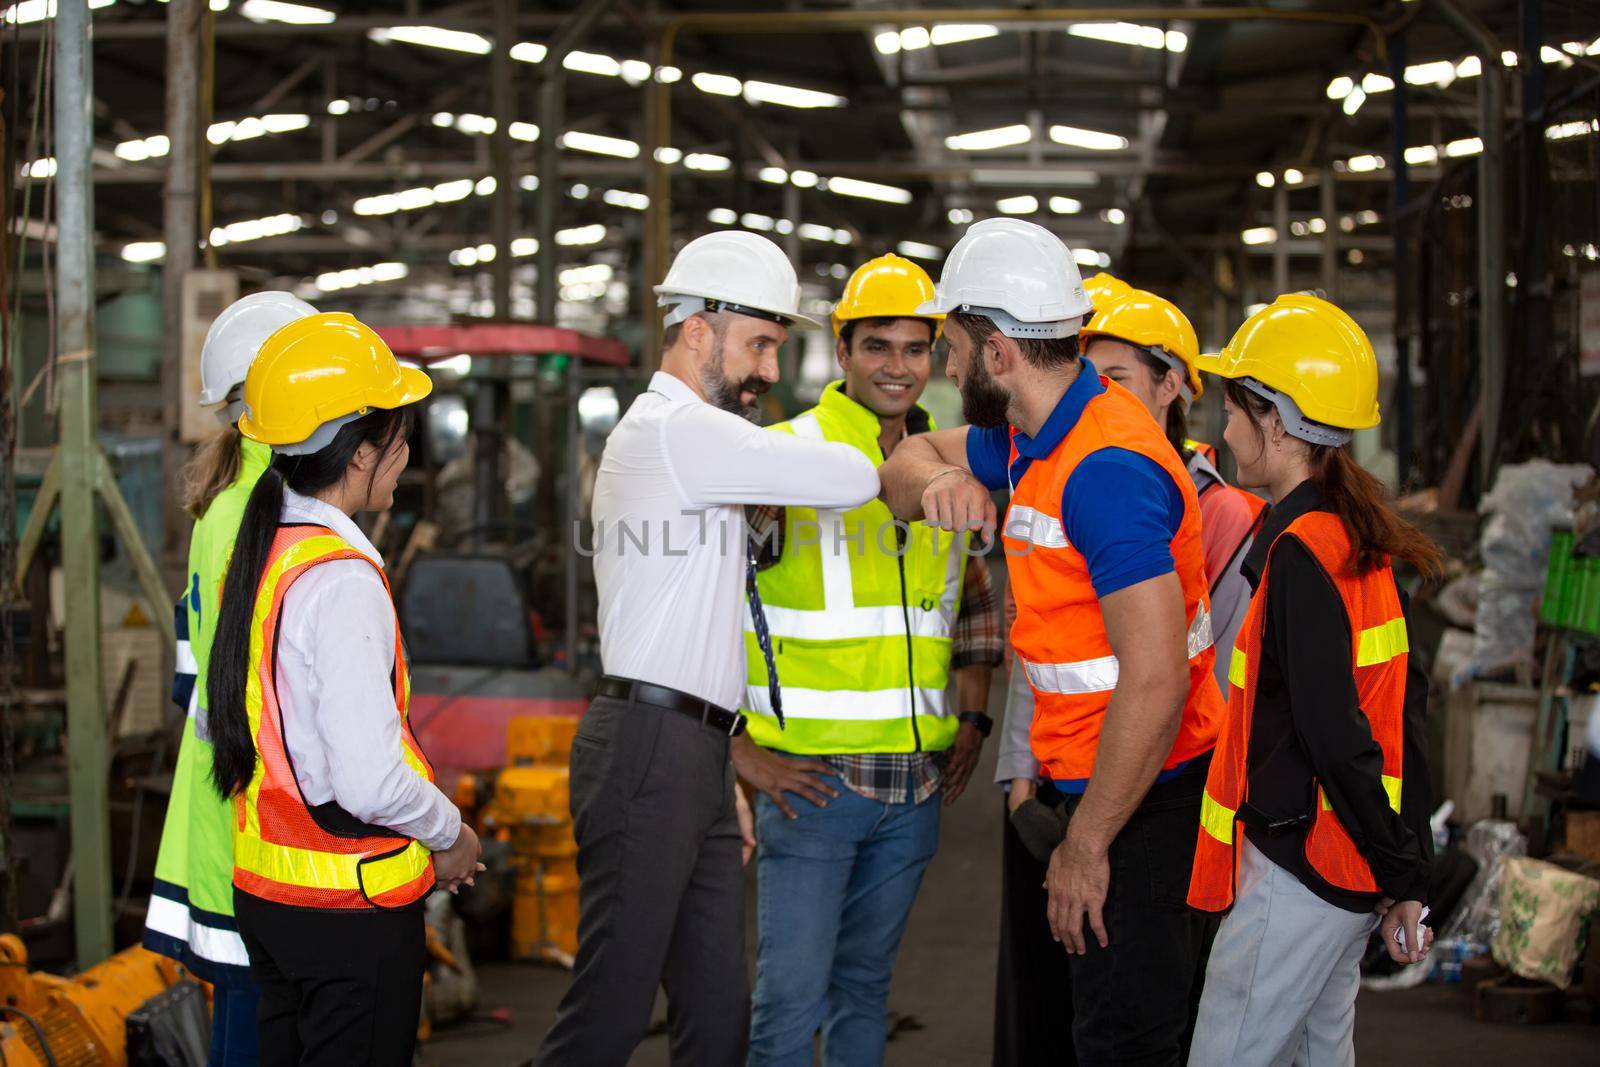 group of workers, change of workers in the factory, people go in helmets and uniforms for an industrial enterprise